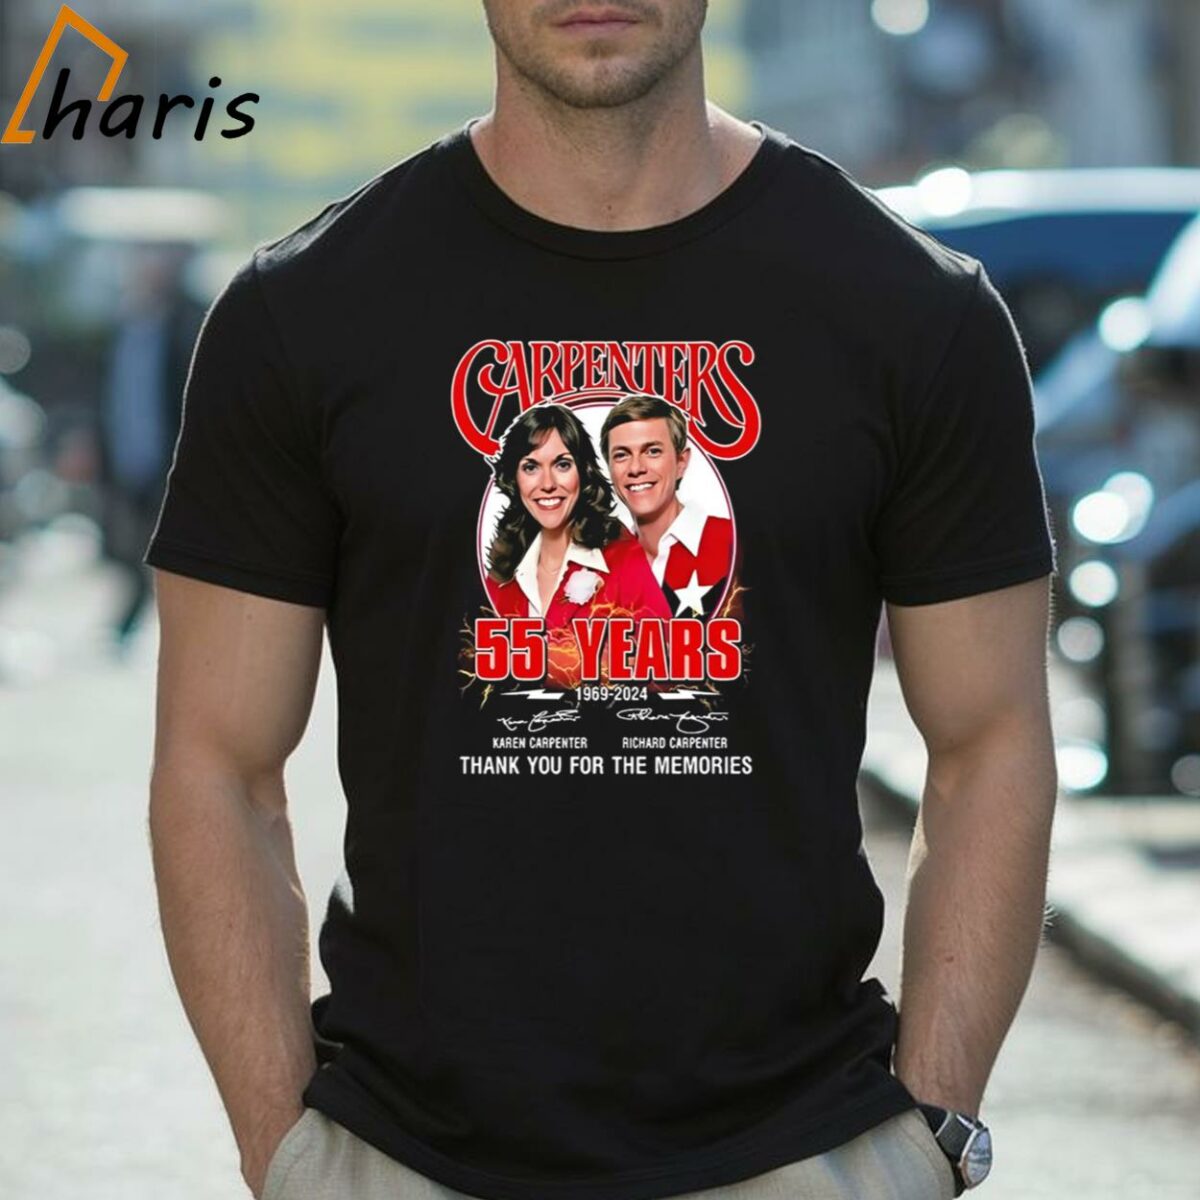 Carpenters 55 Years 1969 2024 Thank You For The Memories Signatures T shirt 2 Shirt